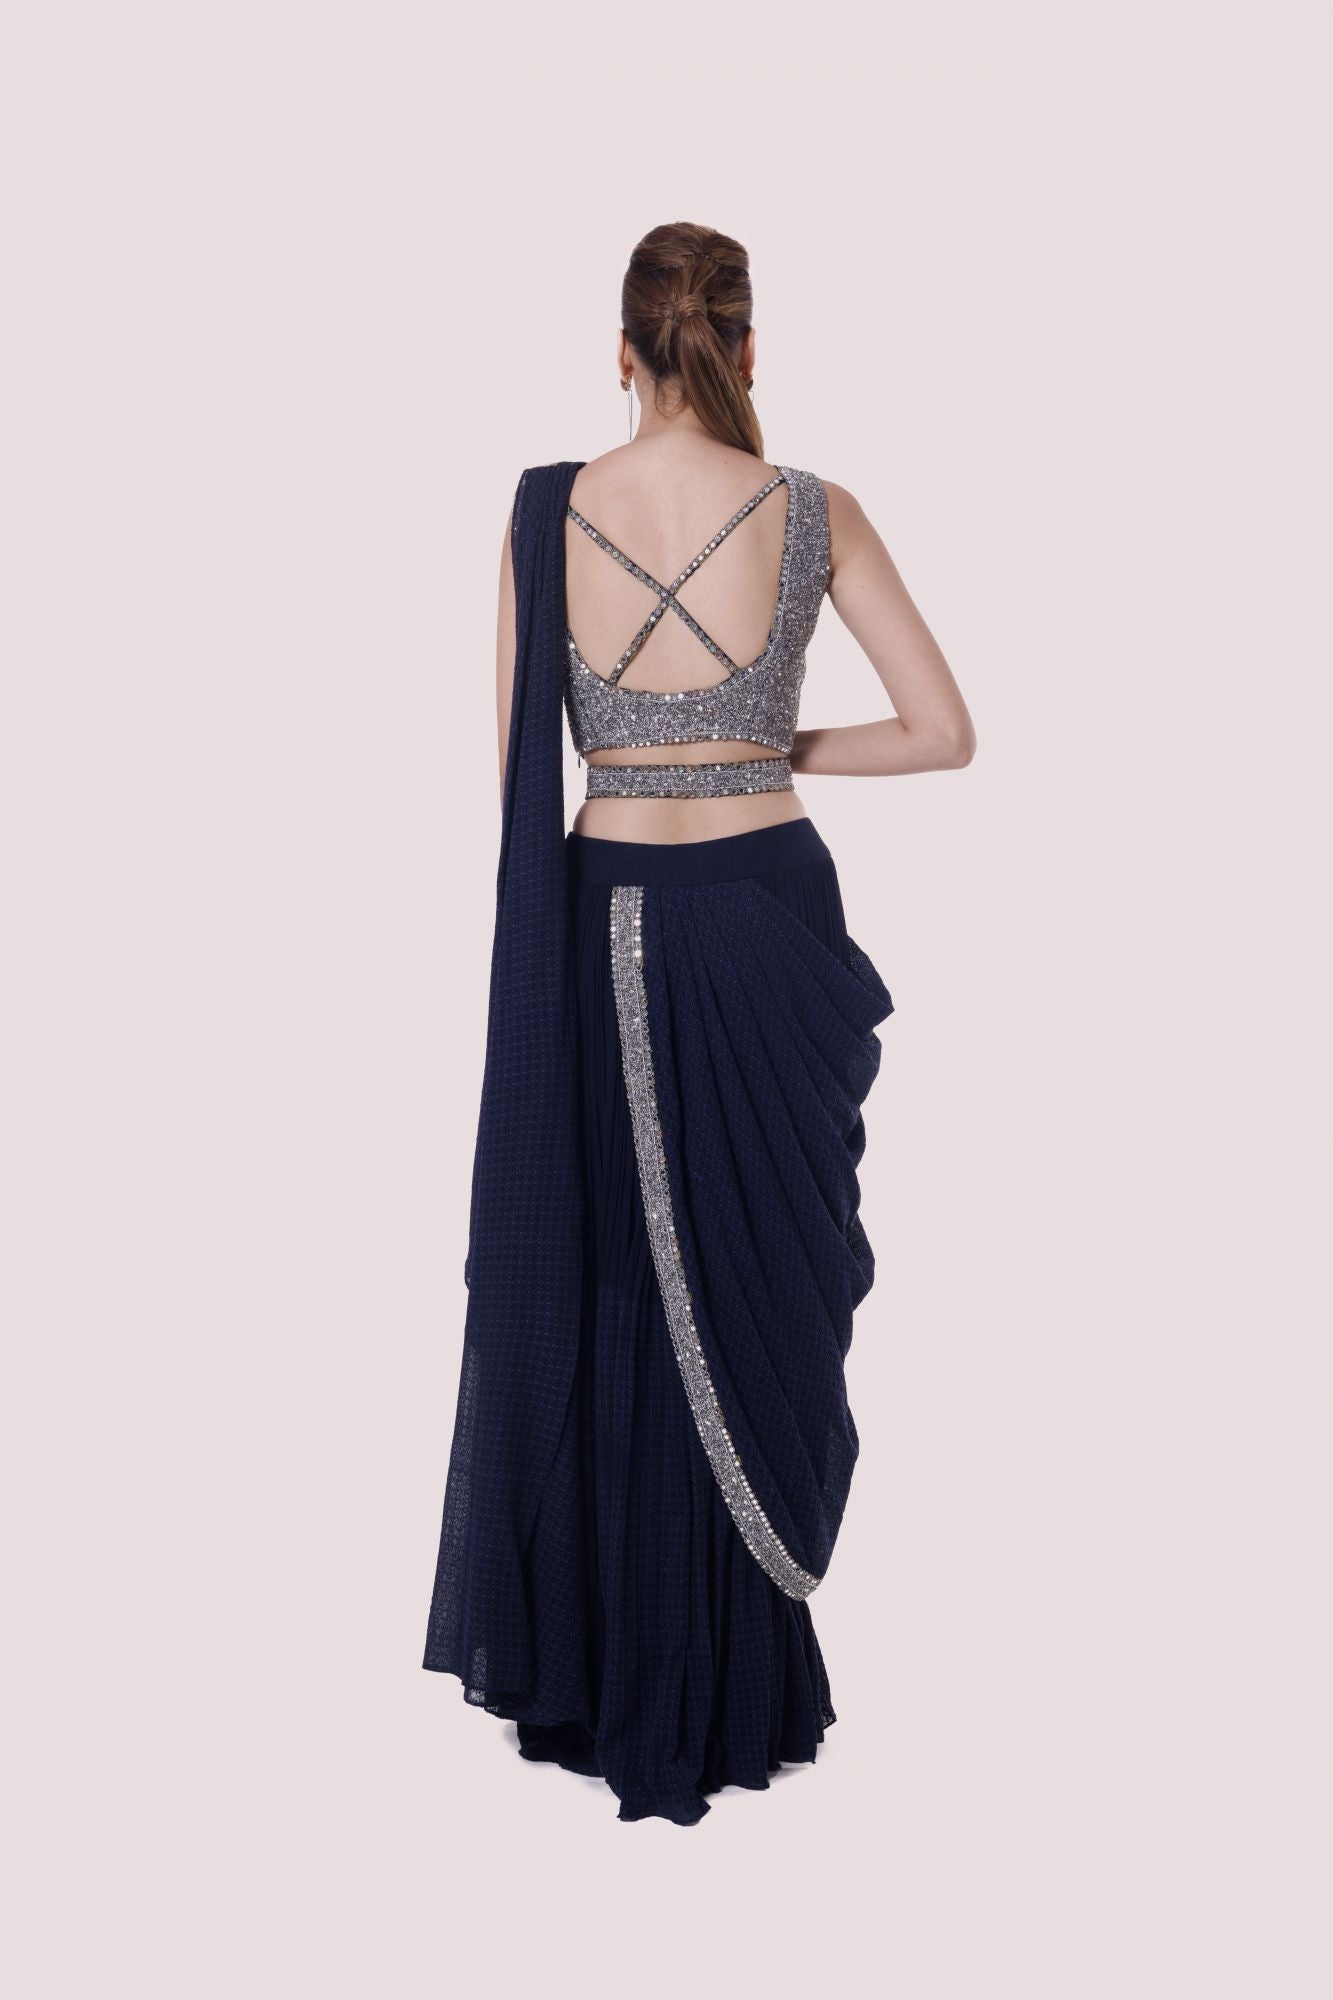 Buy beautiful navy blue georgette drape saree online in USA with belt. Look your best at parties and weddings in beautiful designer sarees, embroidered sarees, handwoven sarees, silk sarees, organza saris from Pure Elegance Indian saree store in USA.-back